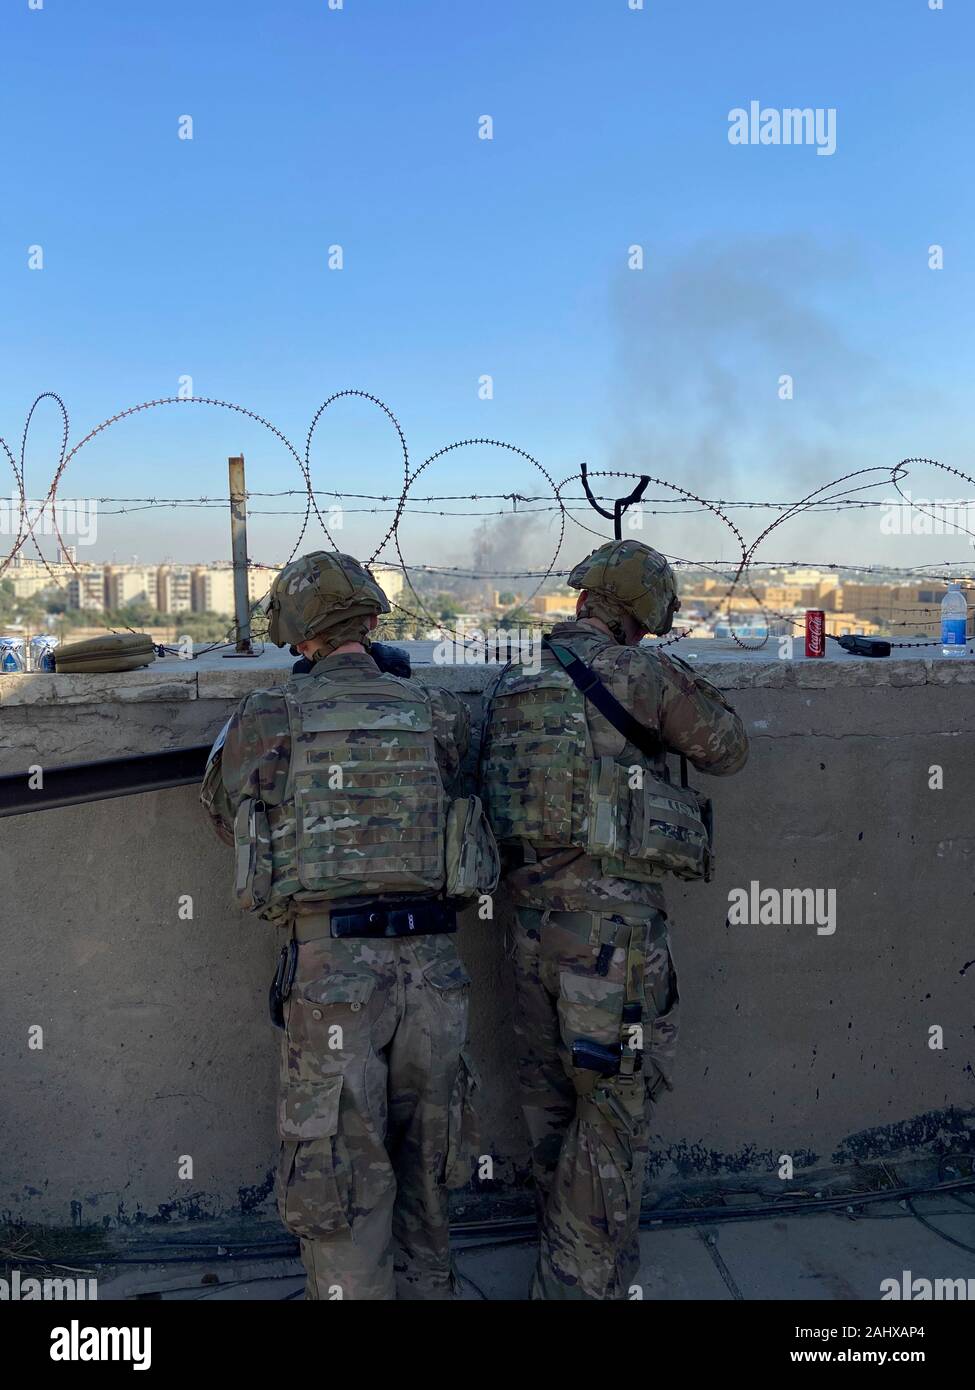 Baghdad, Iraq. 31 December, 2019. U.S. Army Soldiers from 1st Brigade, 25th Infantry Division, Task Force-Iraq, man an observation post at Forward Operating Base Union III overlooking the U.S. Embassy Compound following violent protests by Iran backed militias January 1, 2020 in Baghdad, Iraq. Credit: Maj. Charlie Dietz/Planetpix/Alamy Live News Stock Photo